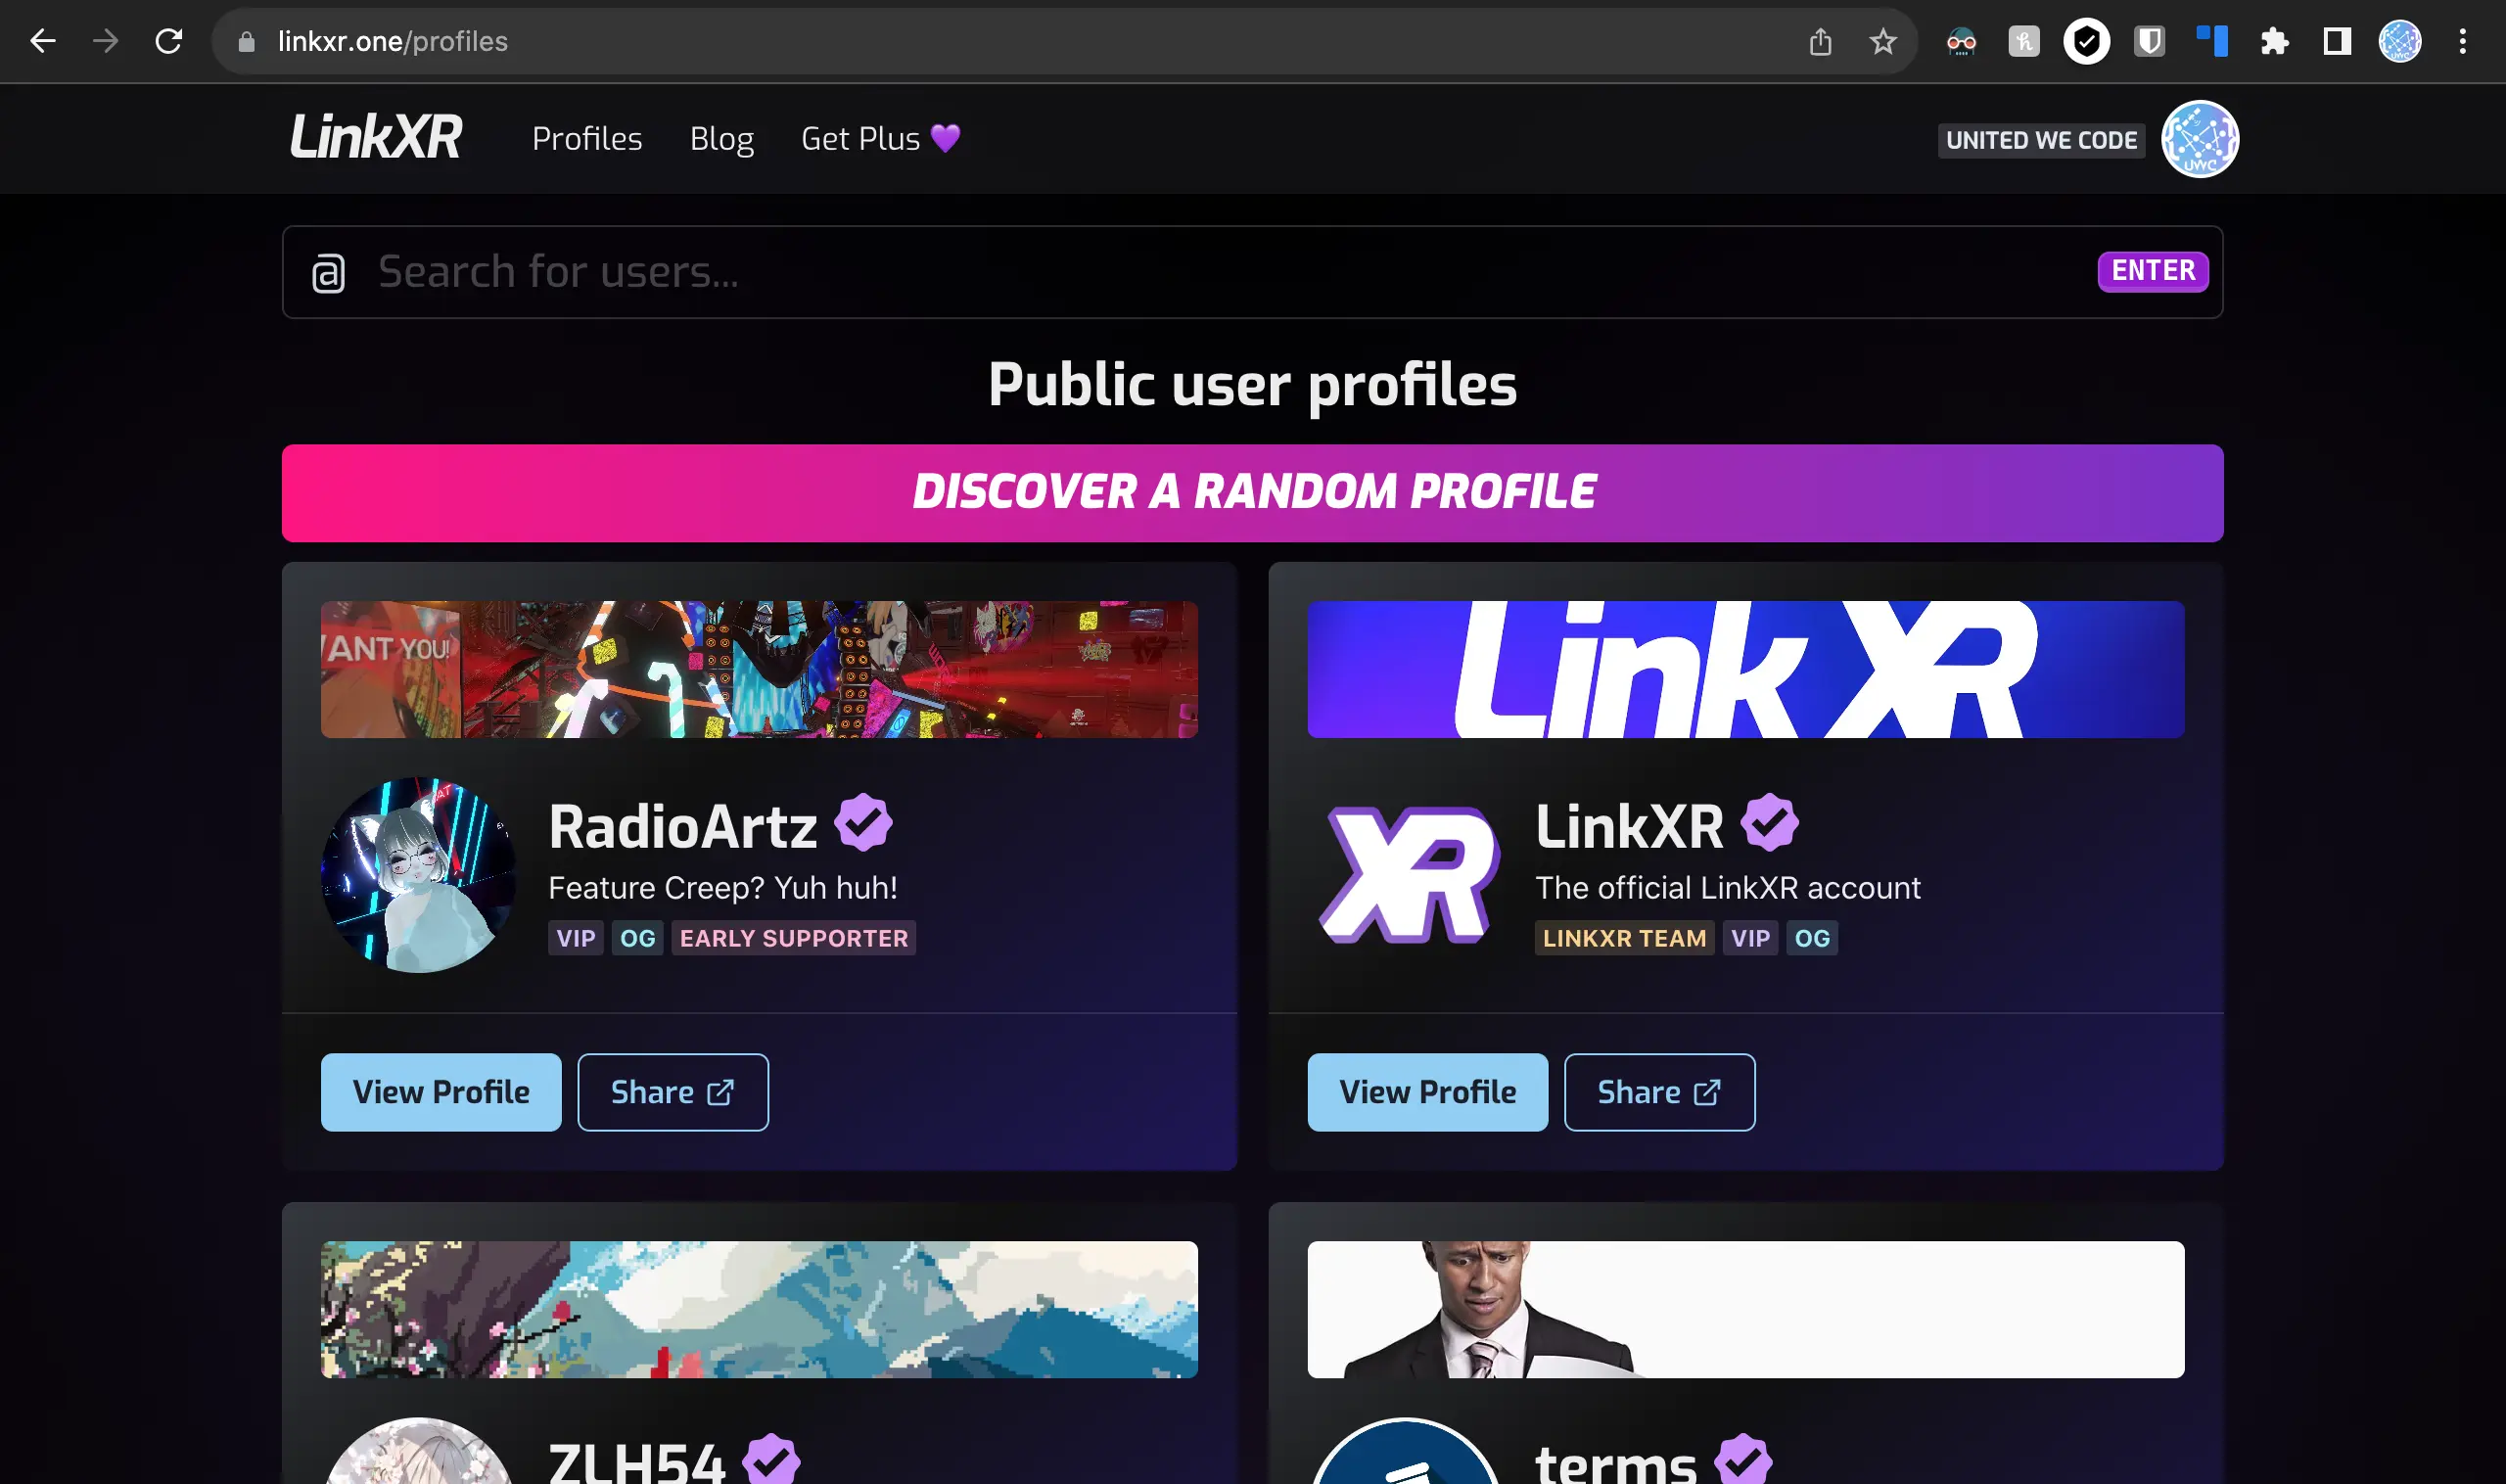 The Public Profiles page on LinkXR